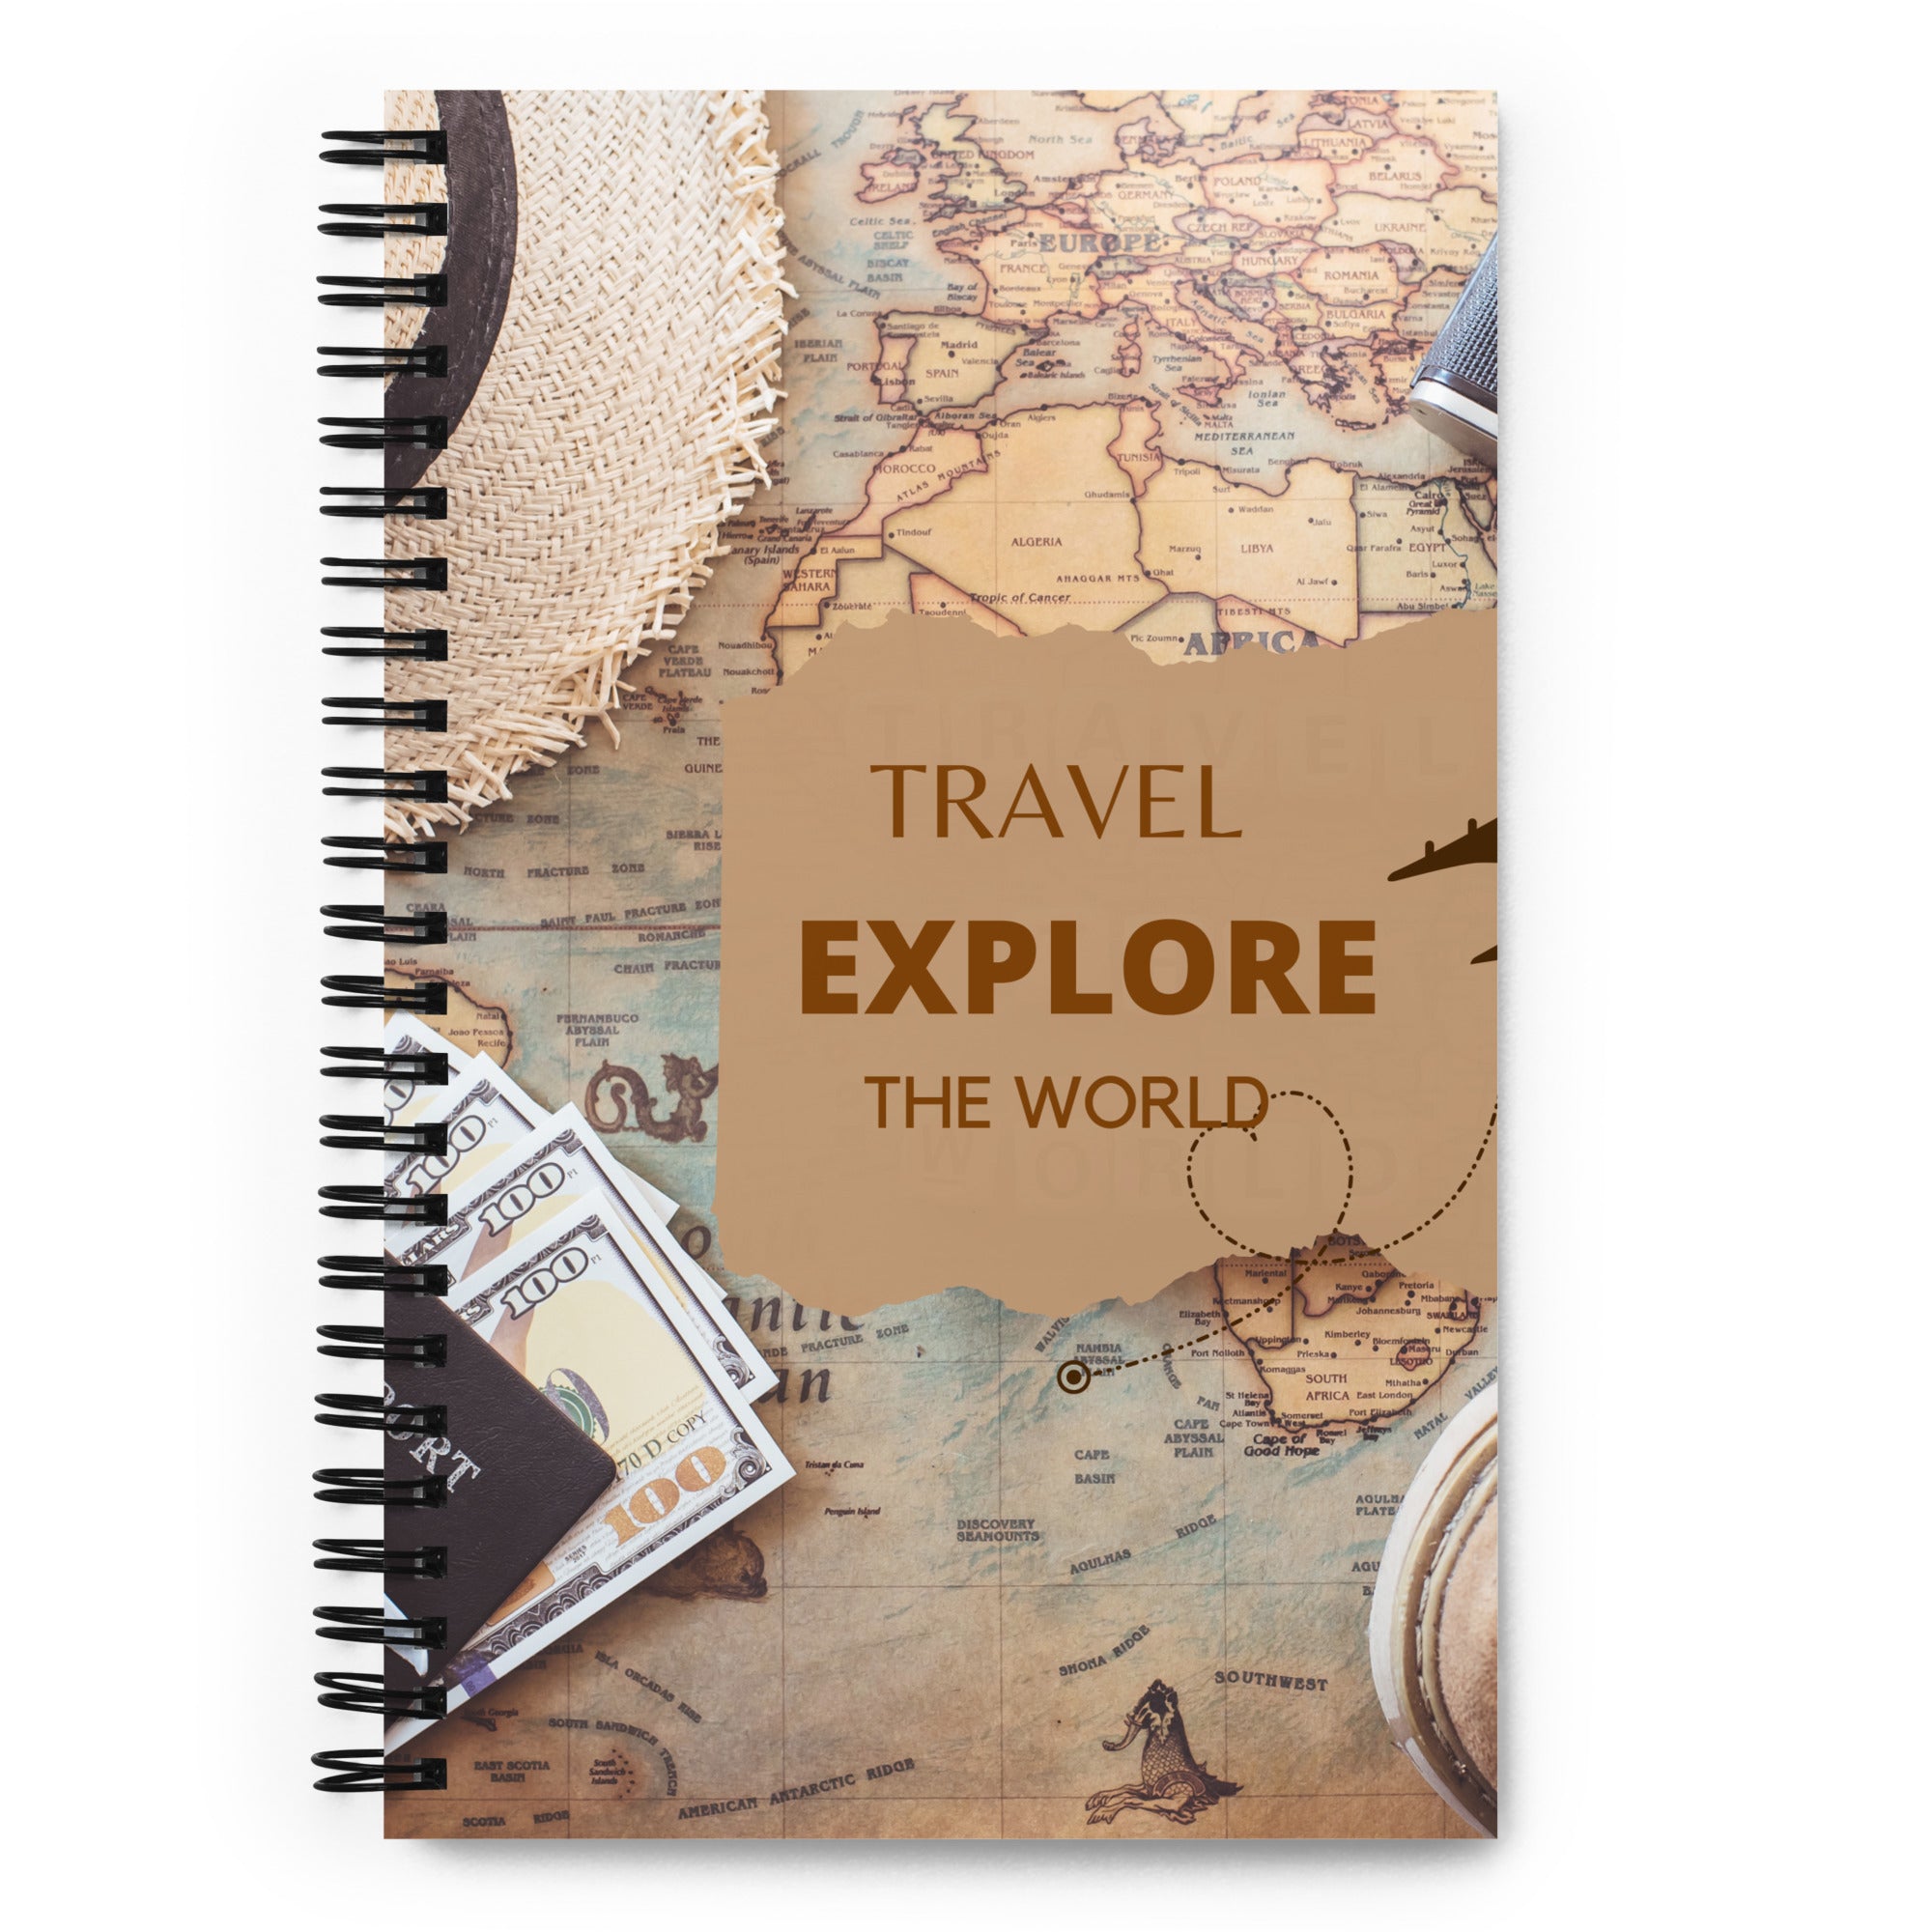 Travel Explore the World - Spiral Notebook